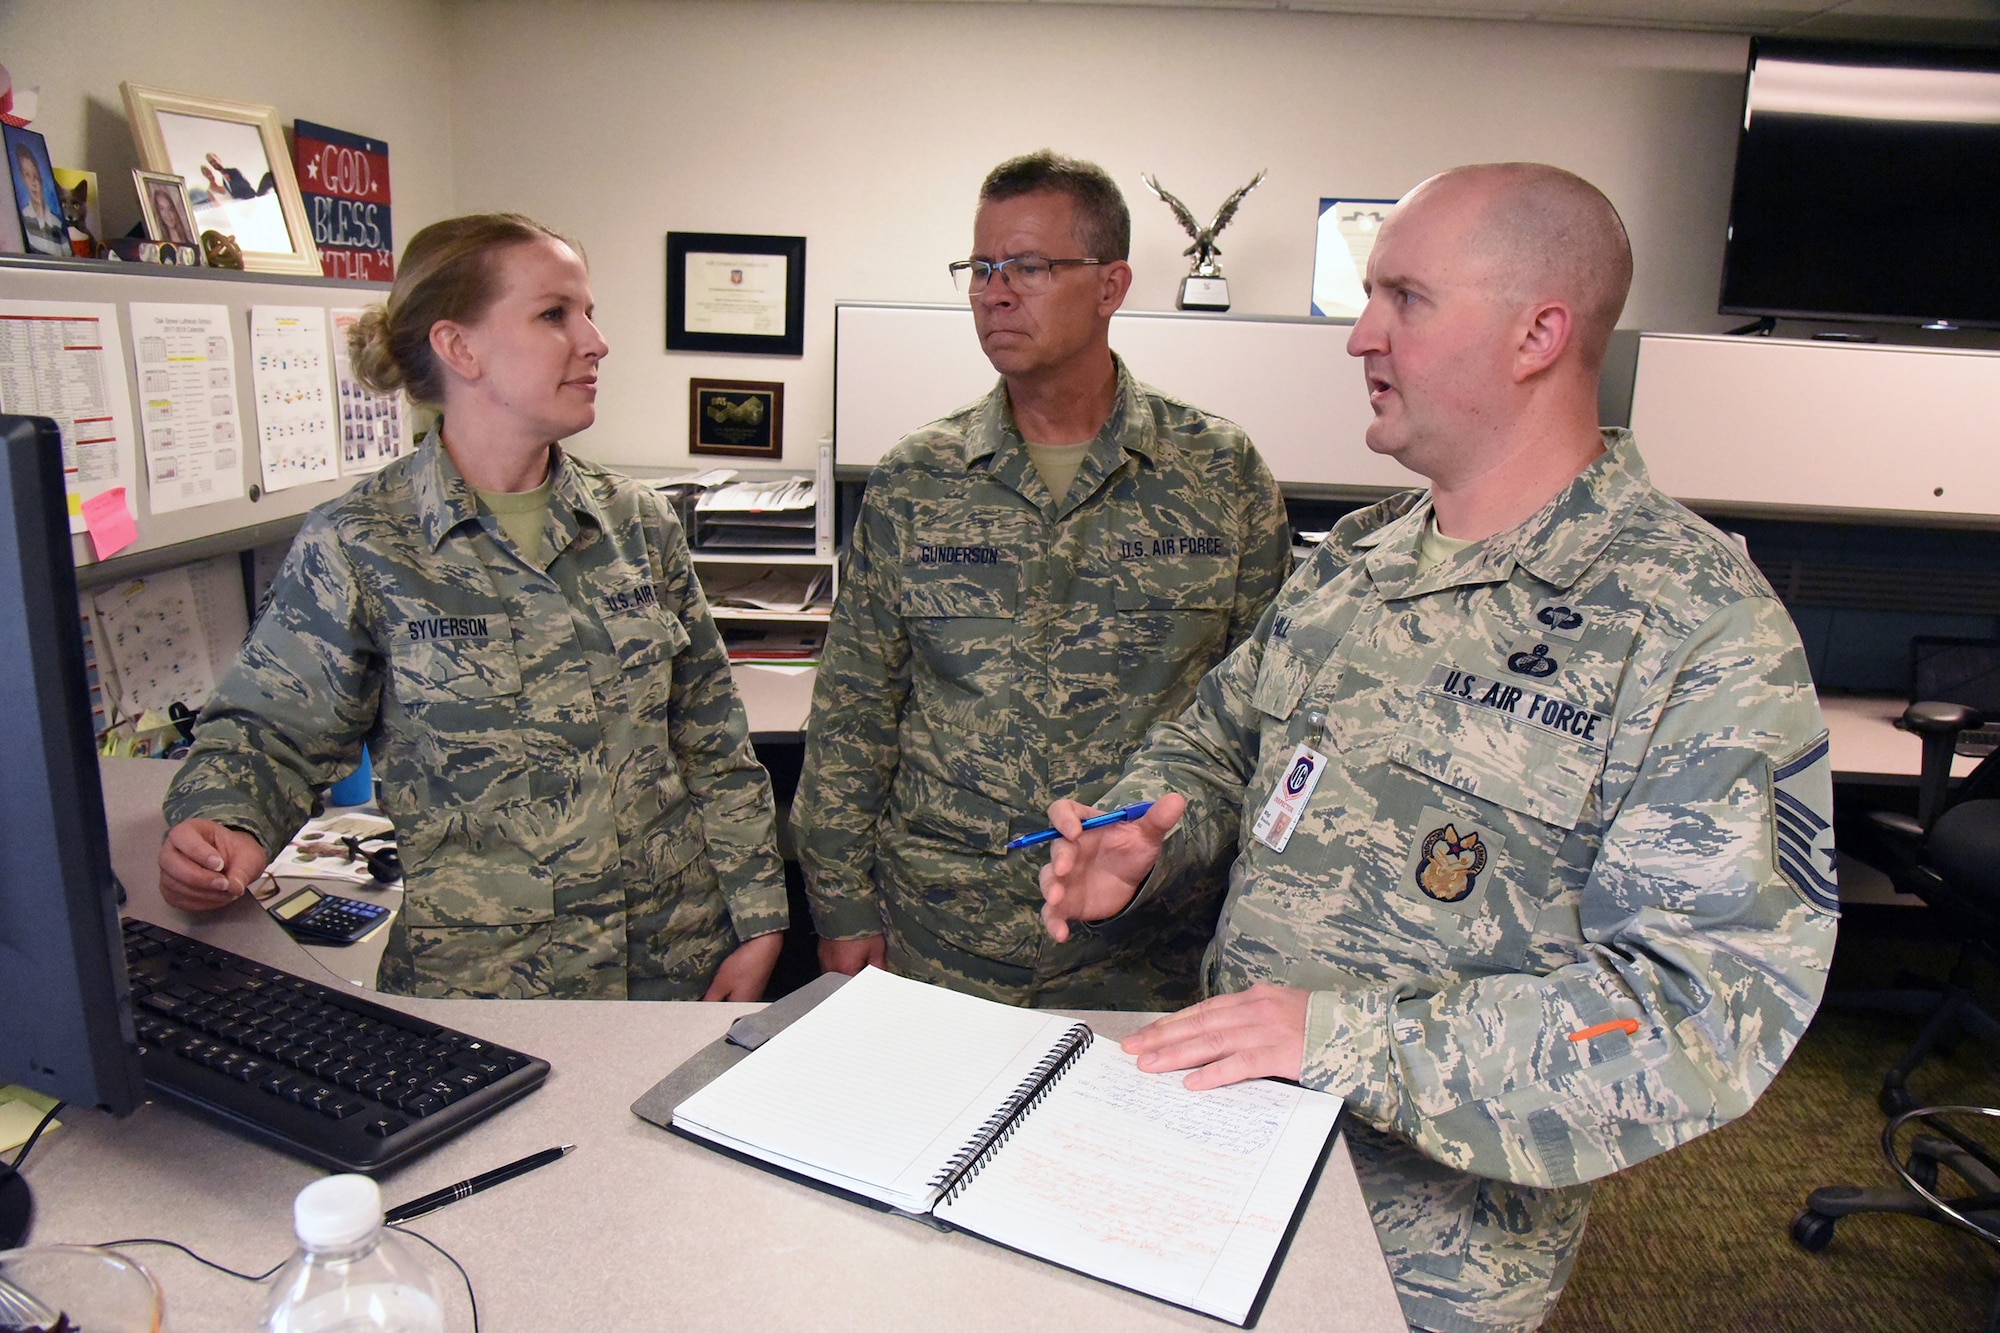 Master Sgt. Brandon Hill, of the Air Combat Command (ACC) inspector general team, right, discusses unit standards and practices with Tech. Sgt. Rachel Syverson, left, and Senior Master Sgt. Lee Gunderson, both assigned to the 119th Logistics Readiness Squadron contracting office, during a unit effectiveness inspection (UEI) at the North Dakota Air National Guard Base, Fargo, N.D., May 19, 2018.